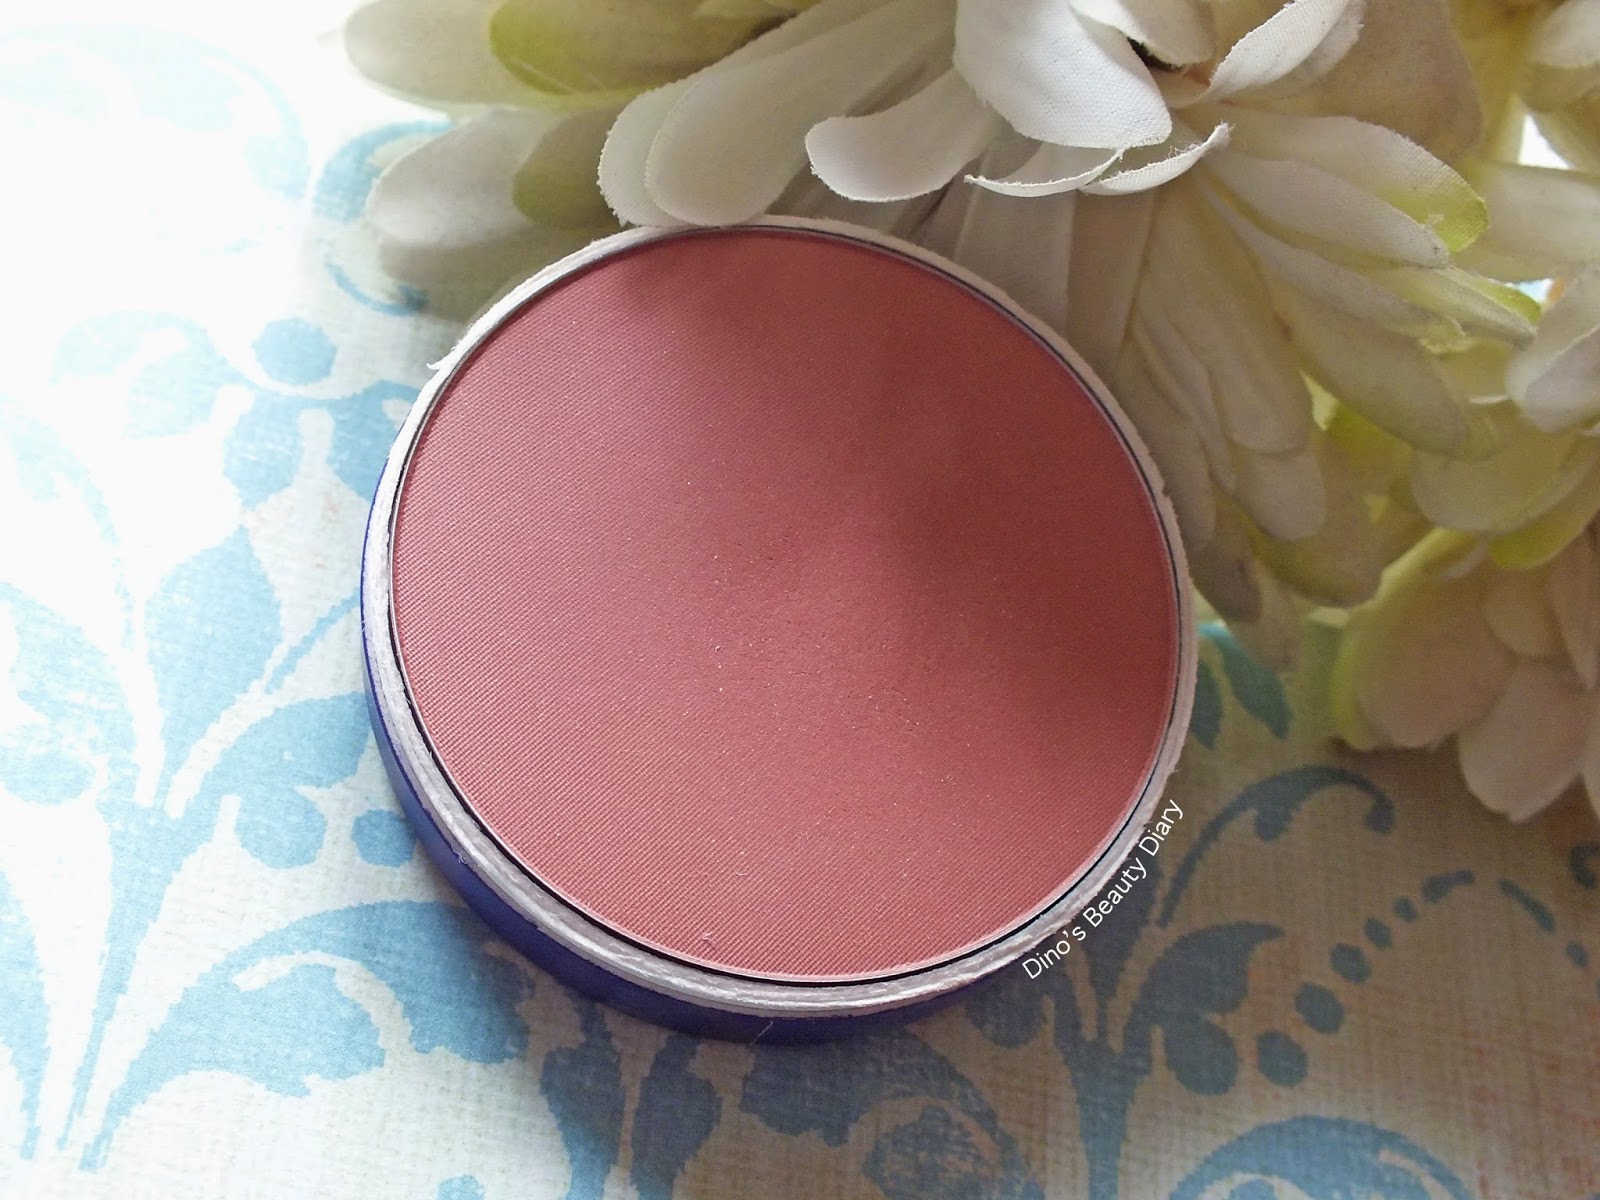 Dino's Beauty Diary - Make Up Review - Xenca Perfection Blush in 'Rose'